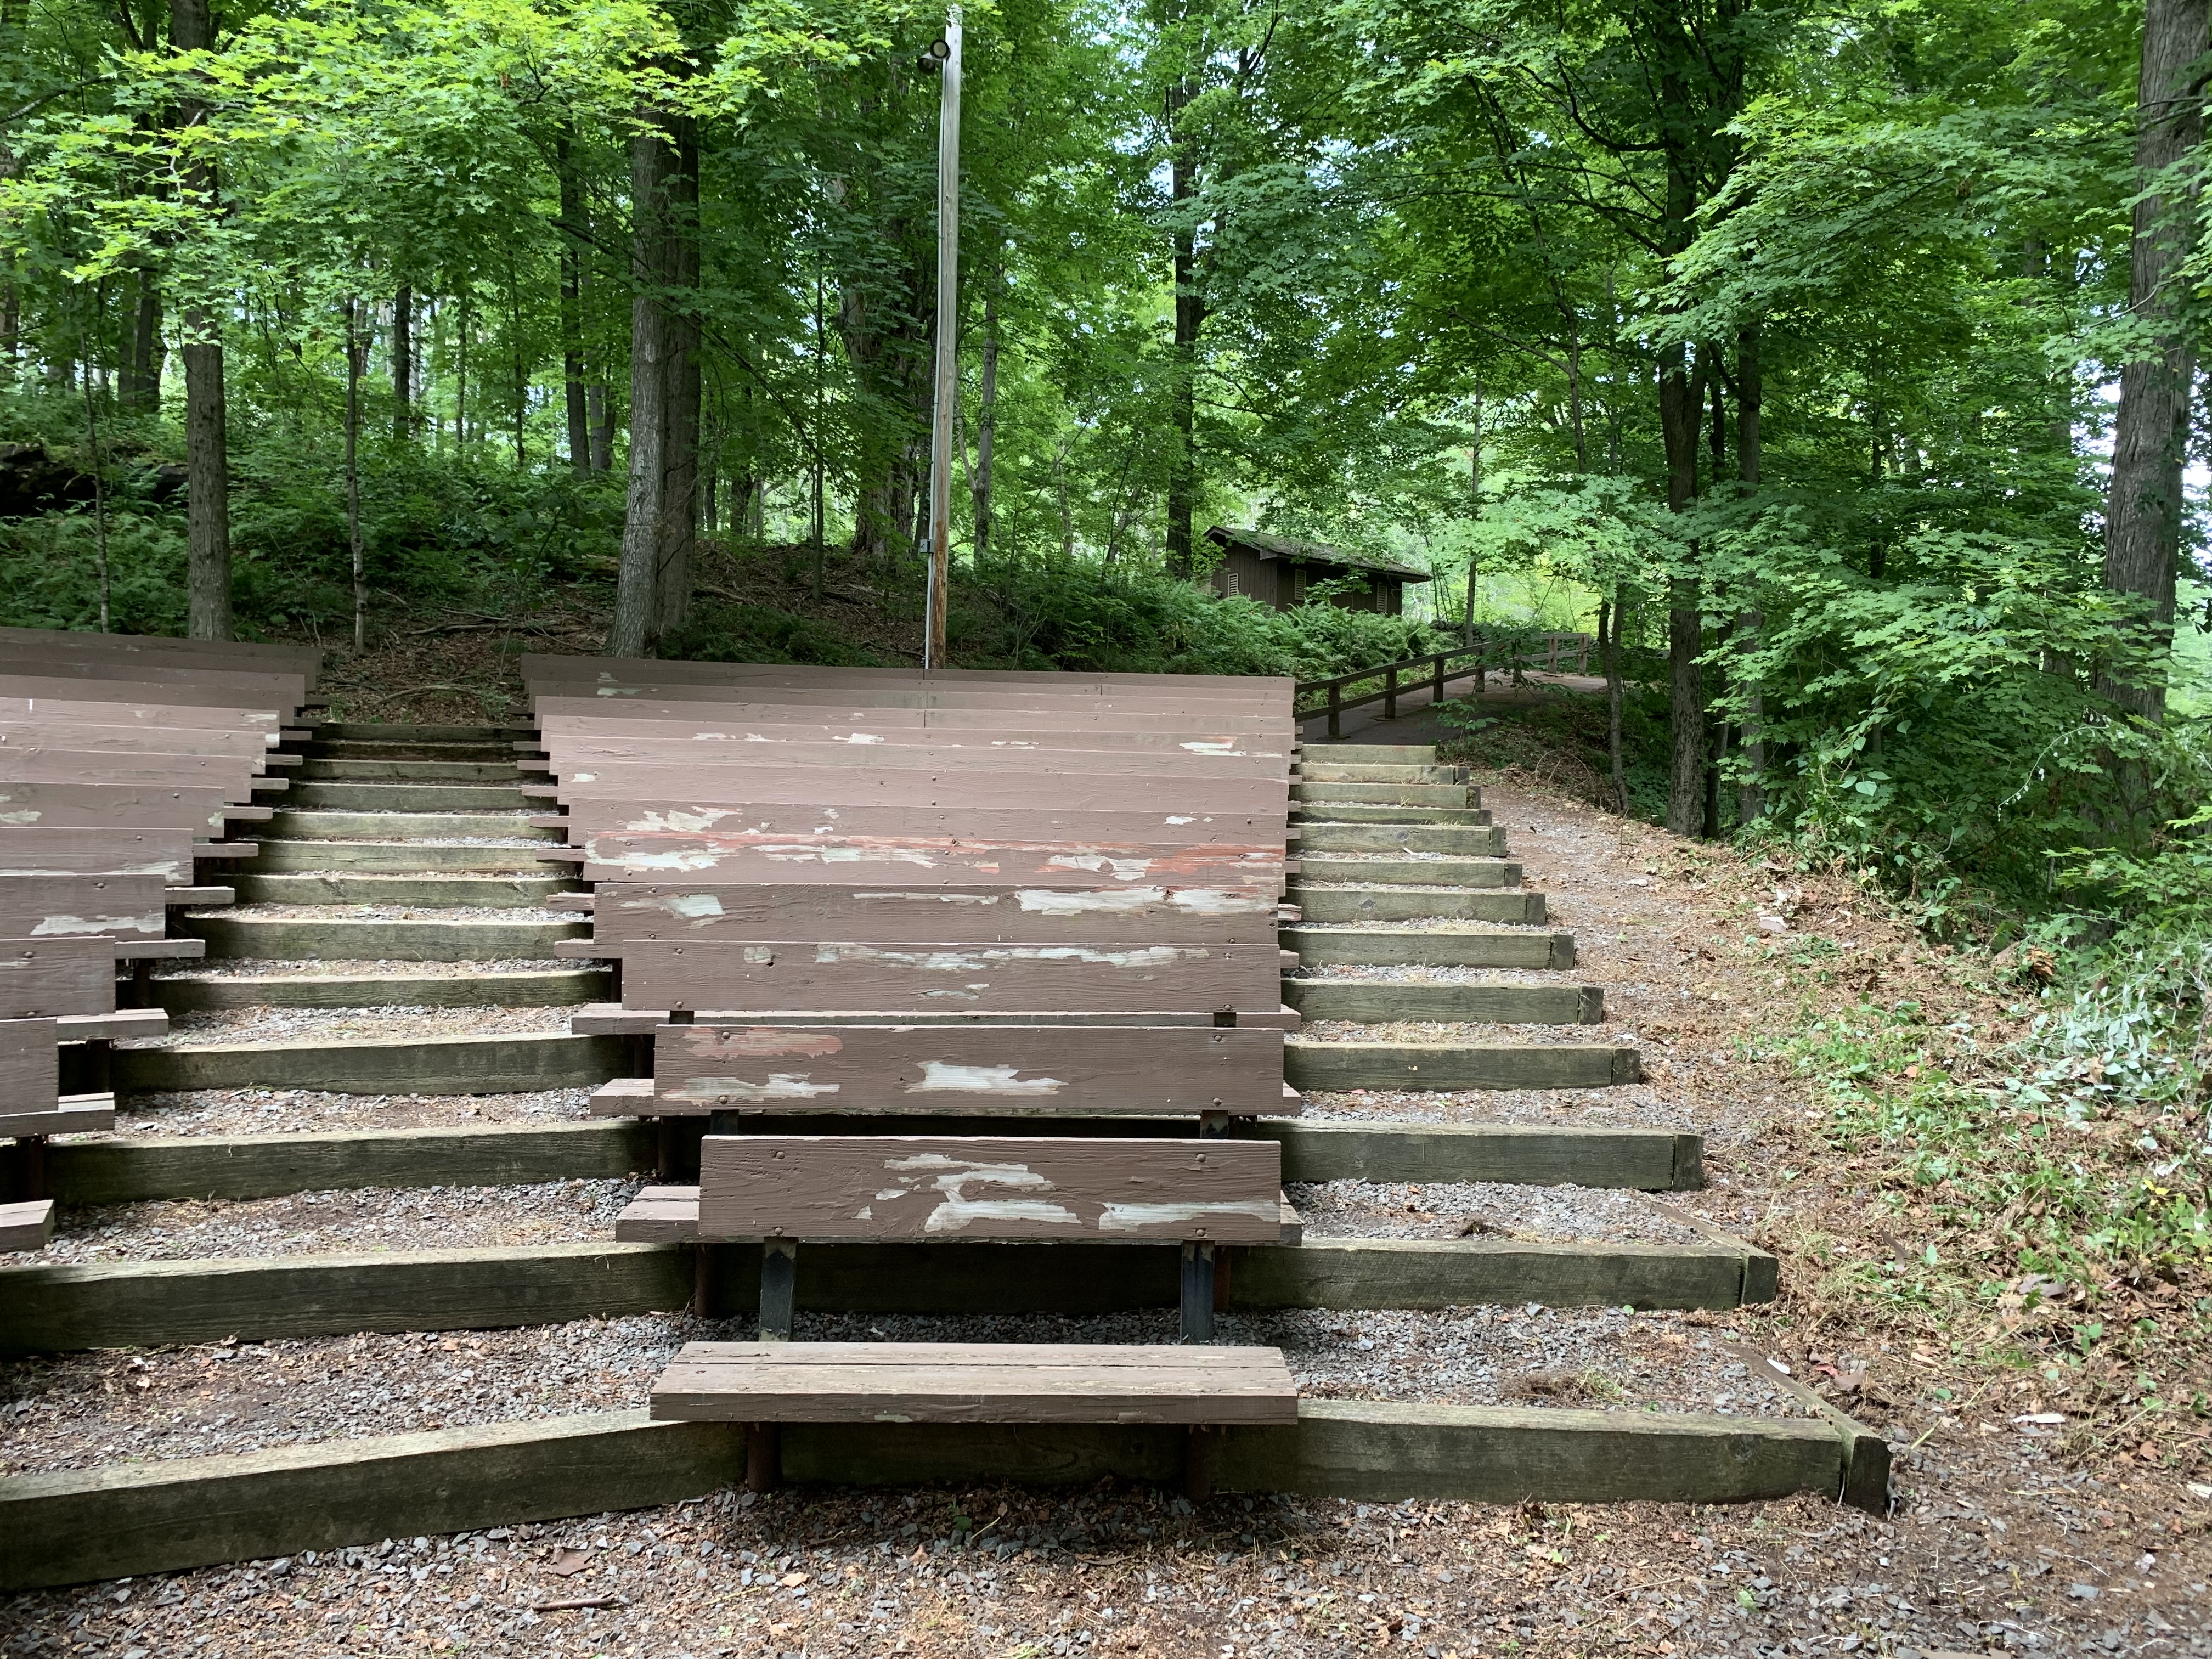 An amphitheater without weeds